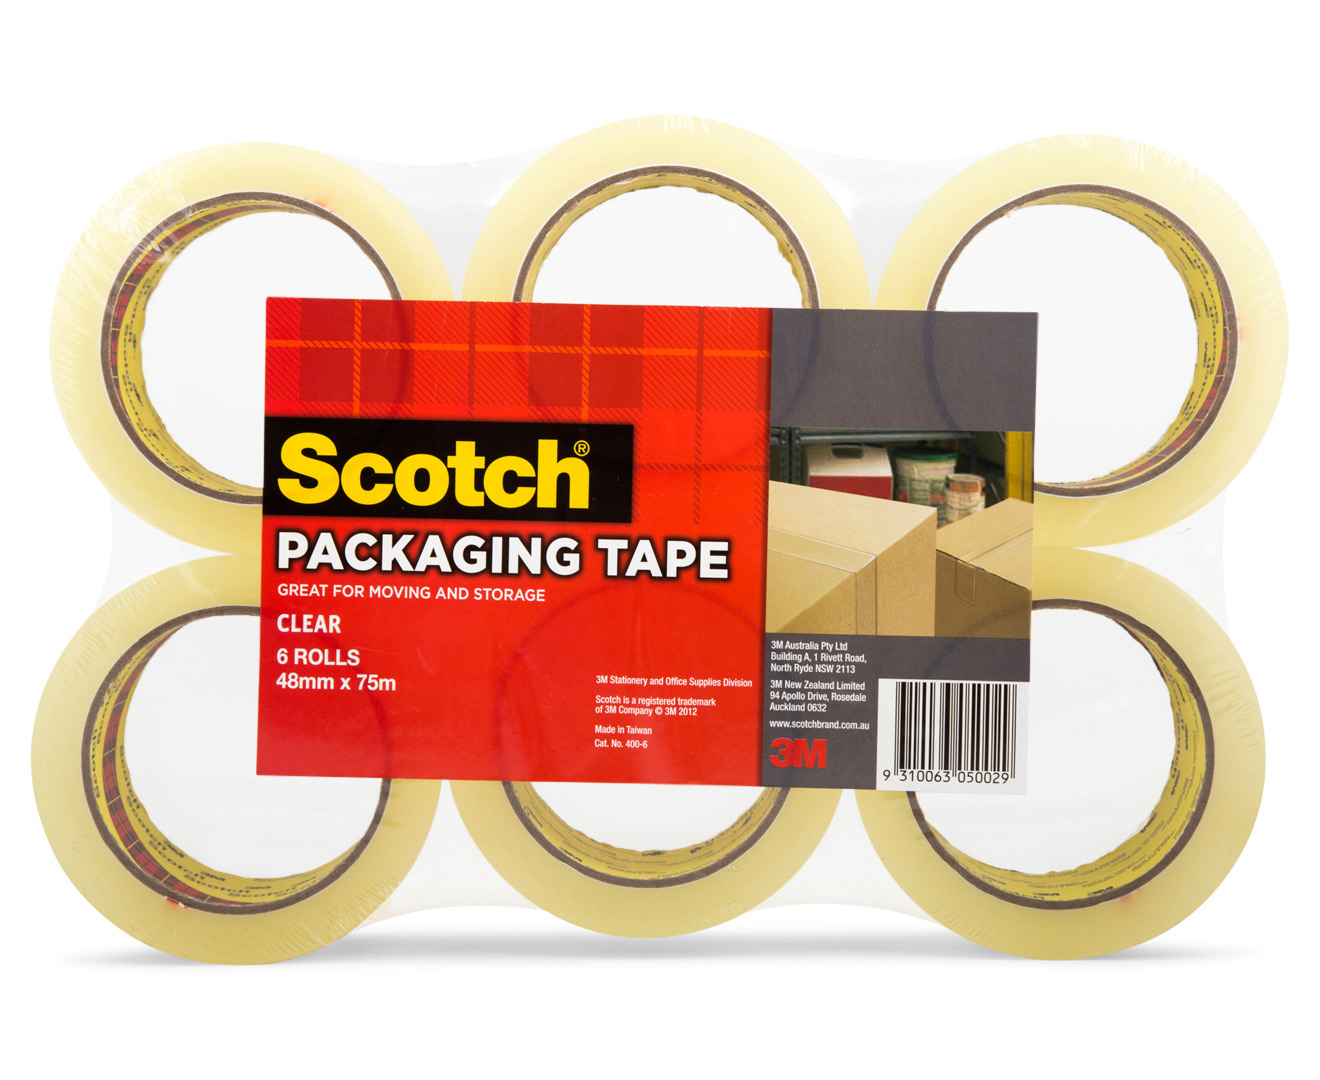 Scotch Packaging Tape Rolls 6-Pack - Clear